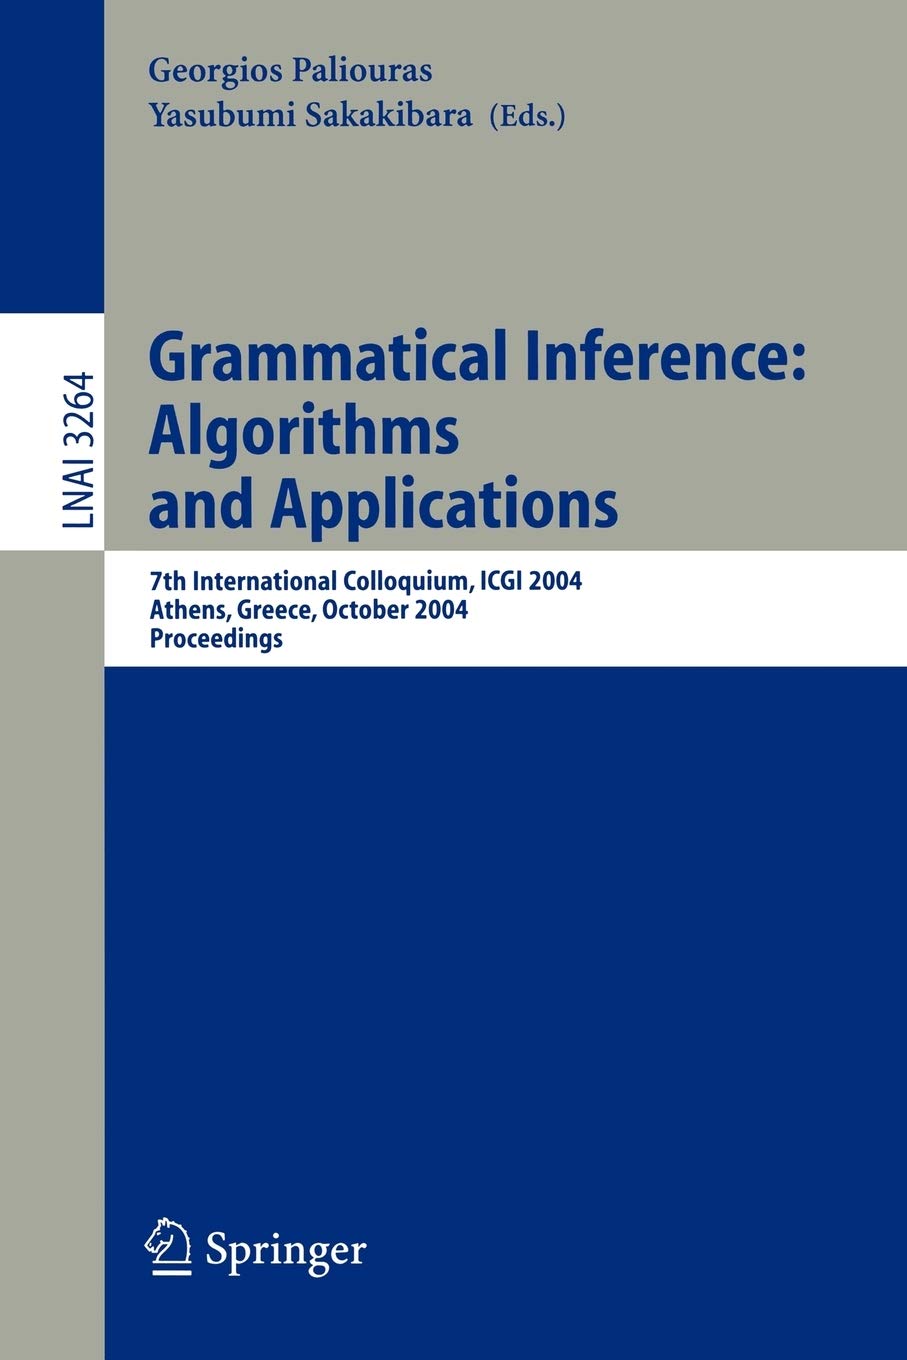 Grammatical Inference: Algorithms and Applications: 7th International Colloquium, ICGI 2004, Athens, Greece, October 11-13, 2004. Proceedings